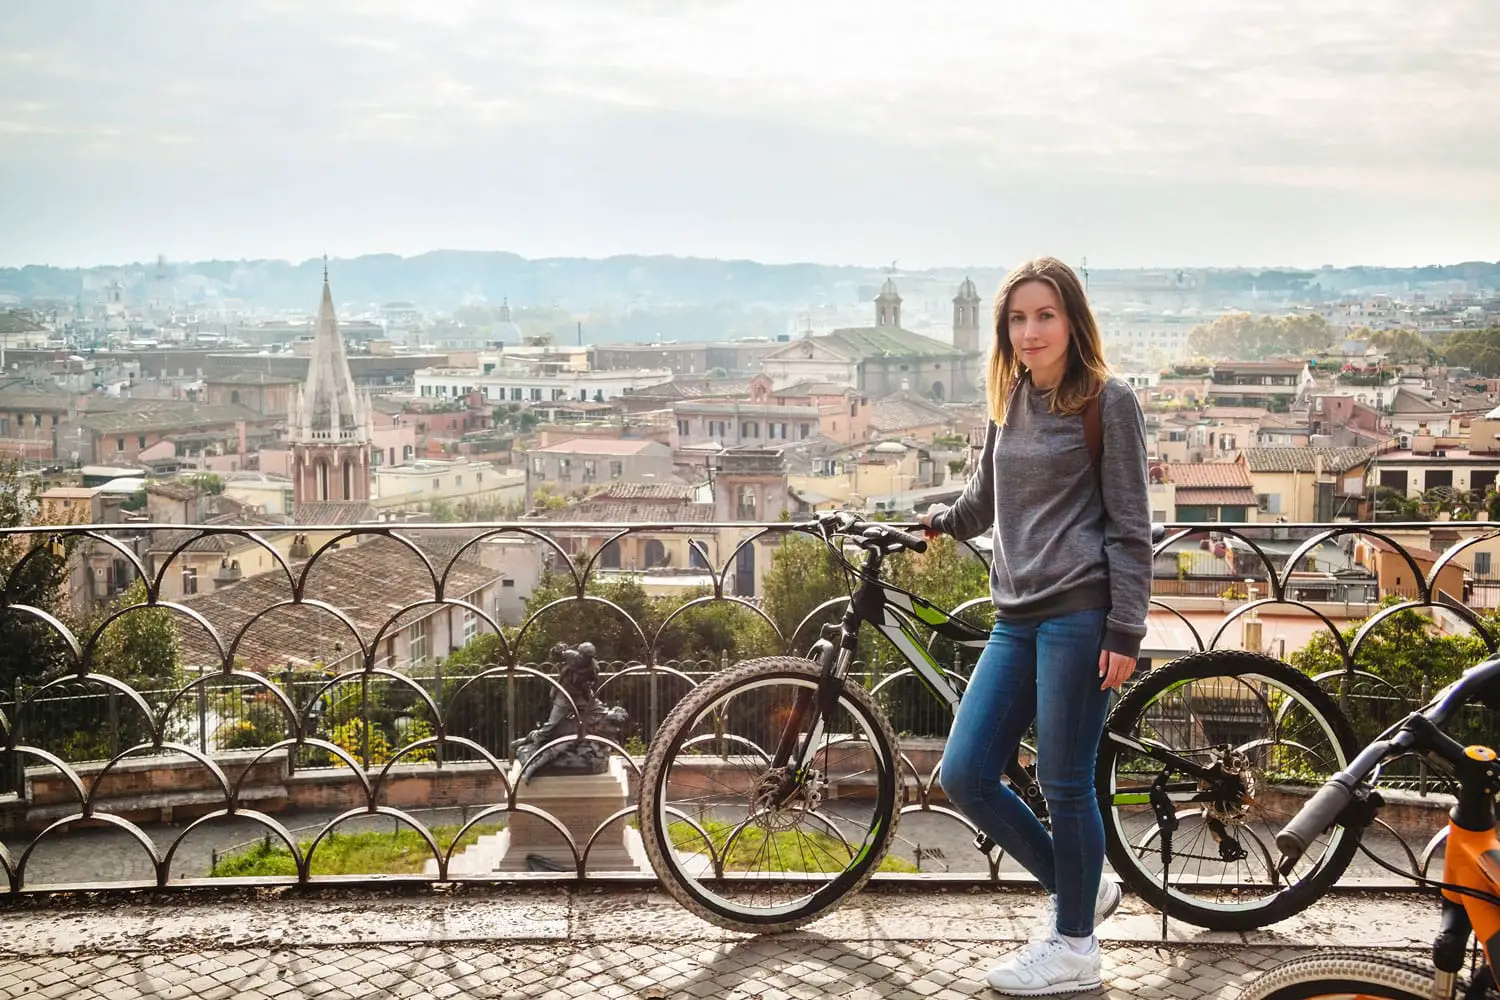 Girl with a bicycle in Rome, Italy